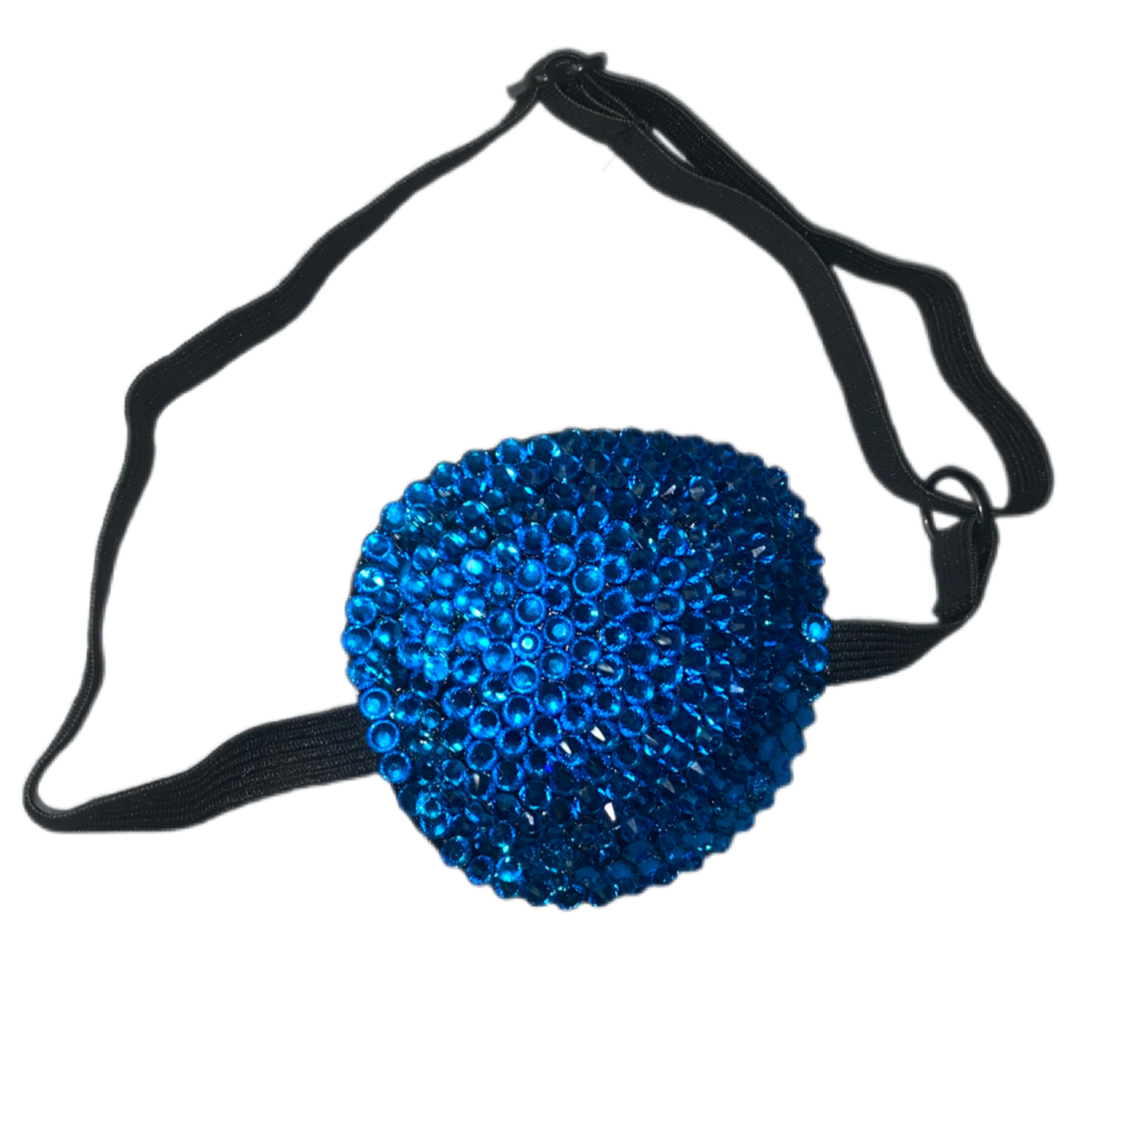 Black Padded Medical Patch In Capri Blue Luxe Crystal Eye Patch